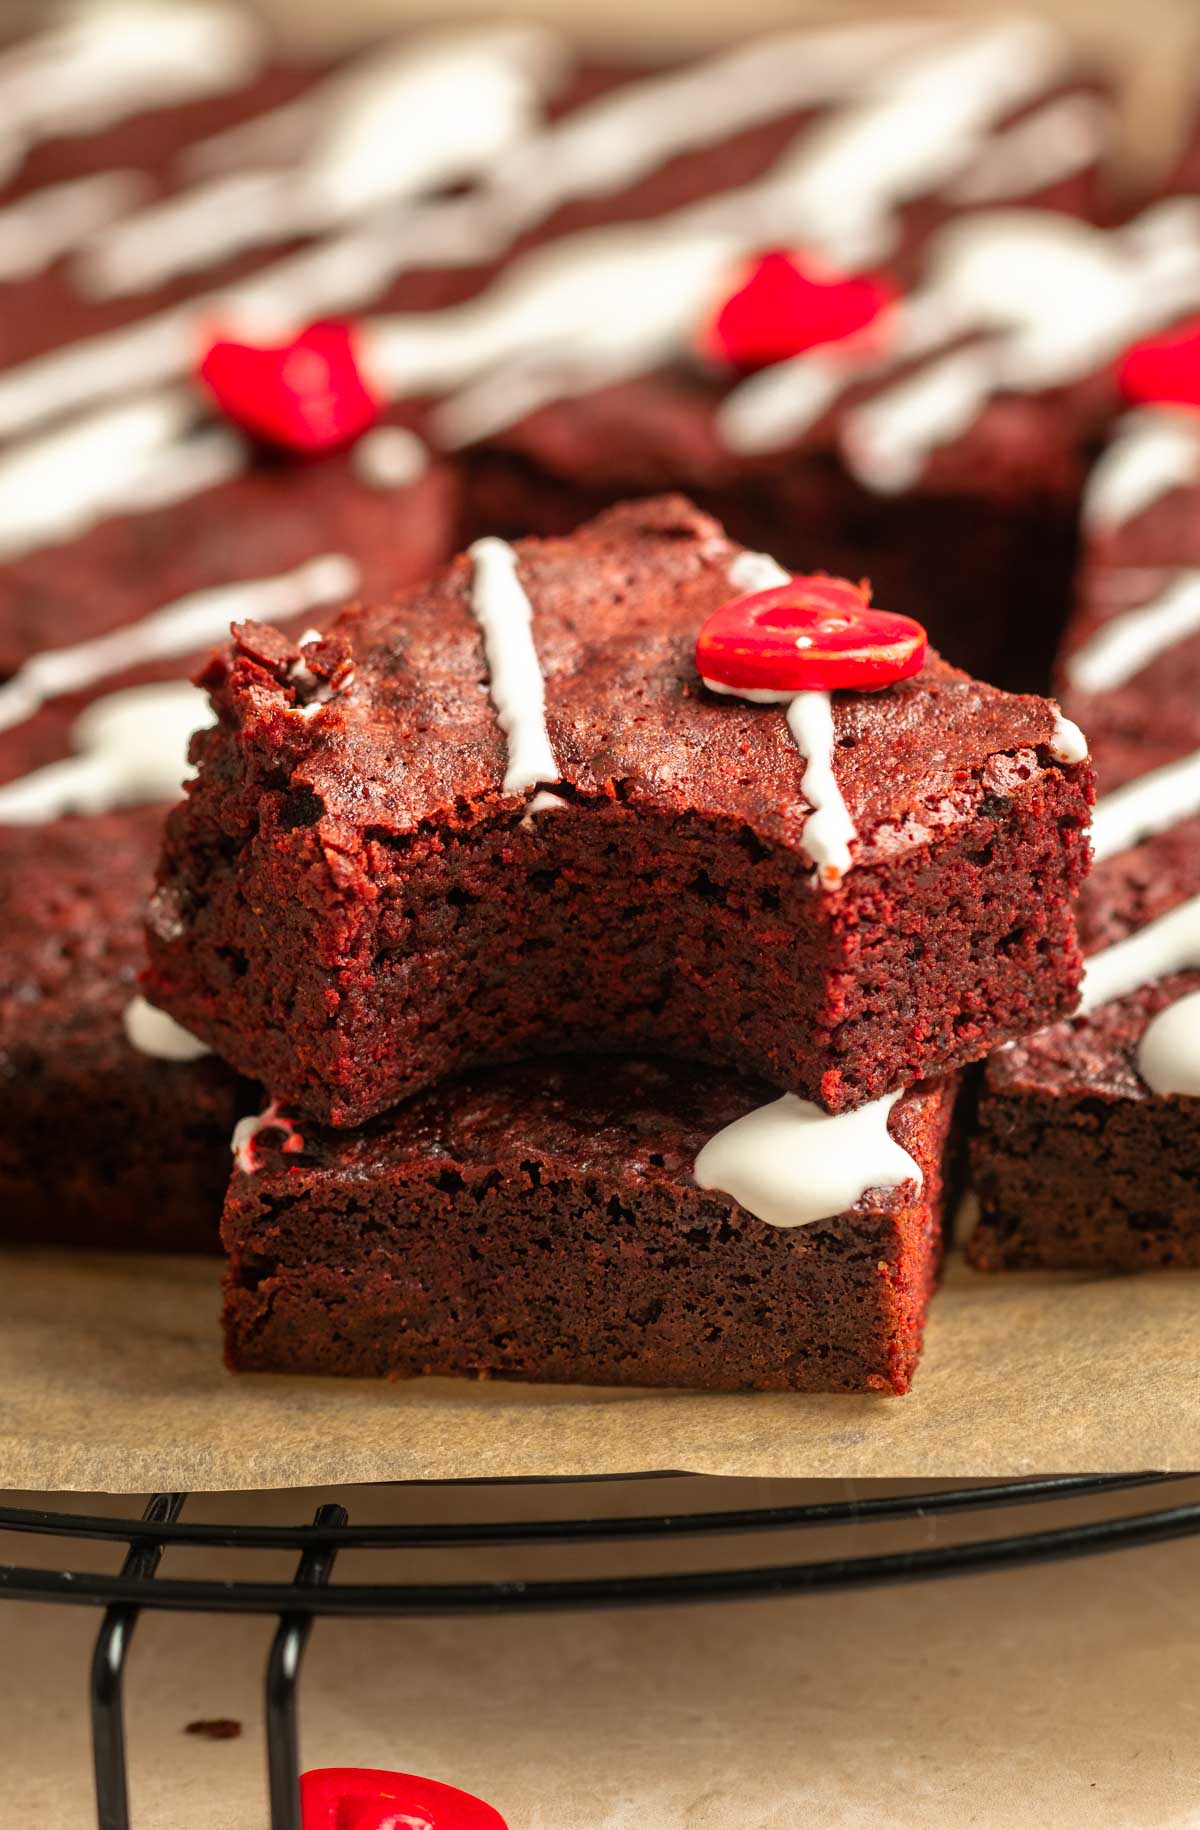 Two slices of red velvet brownies with the top one missing a bite.